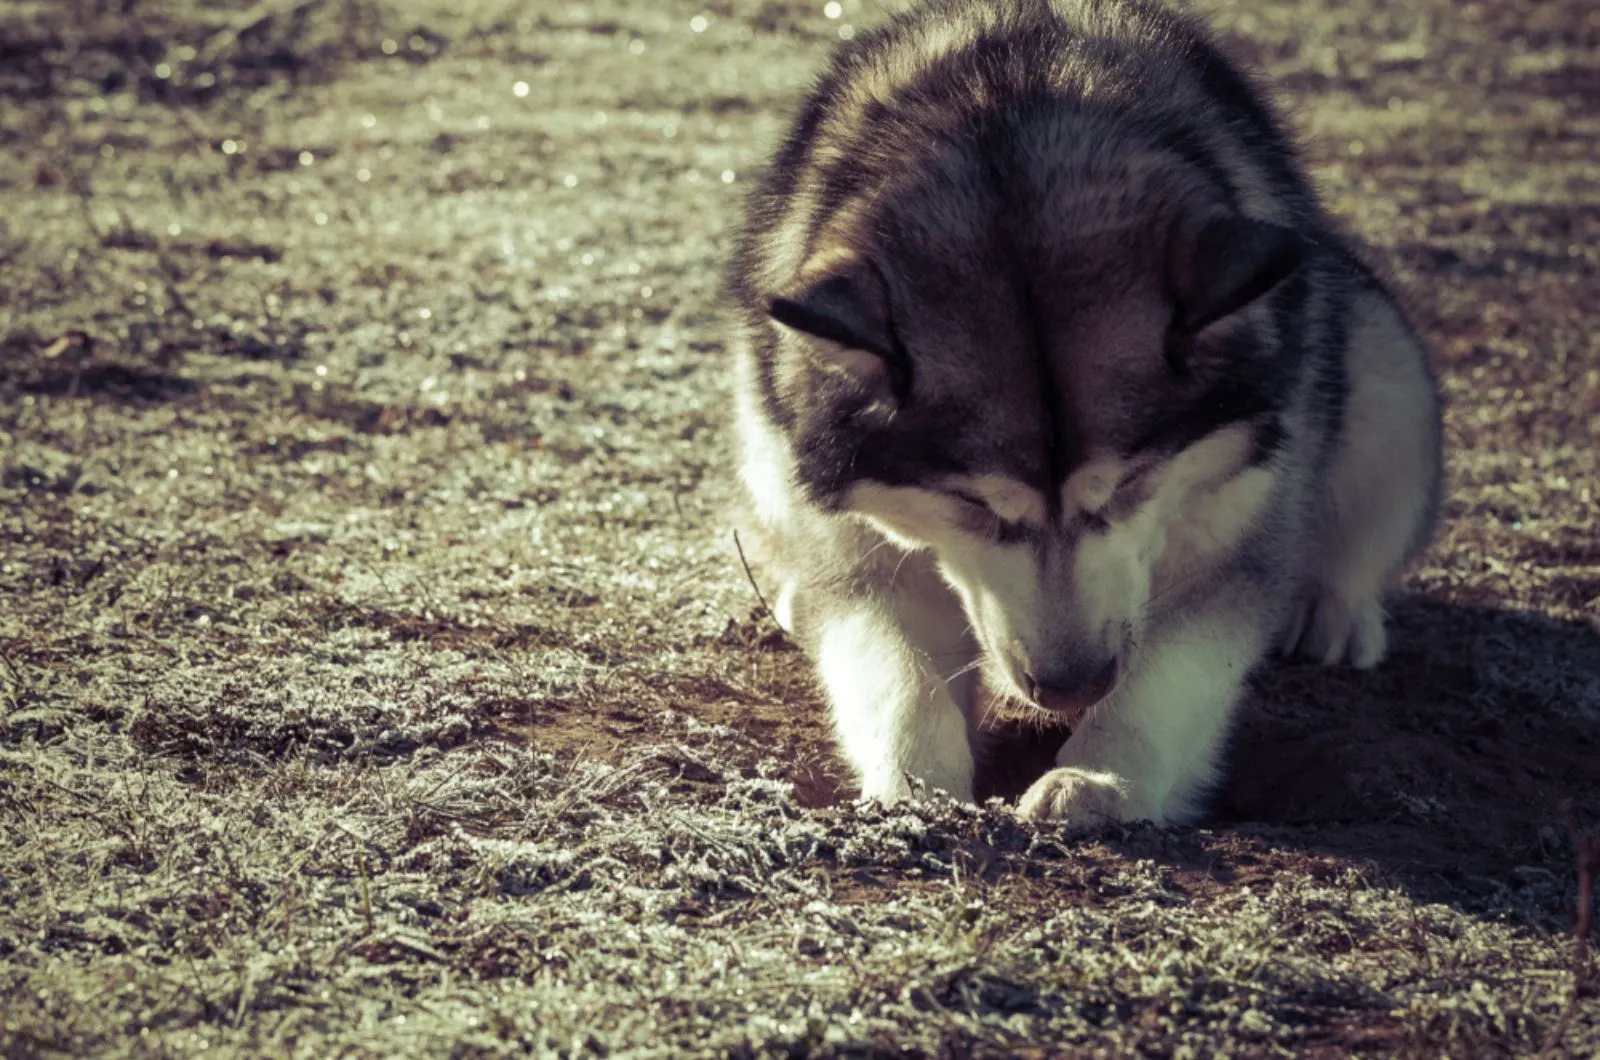 alaskan malamute is digging a hole in the ground